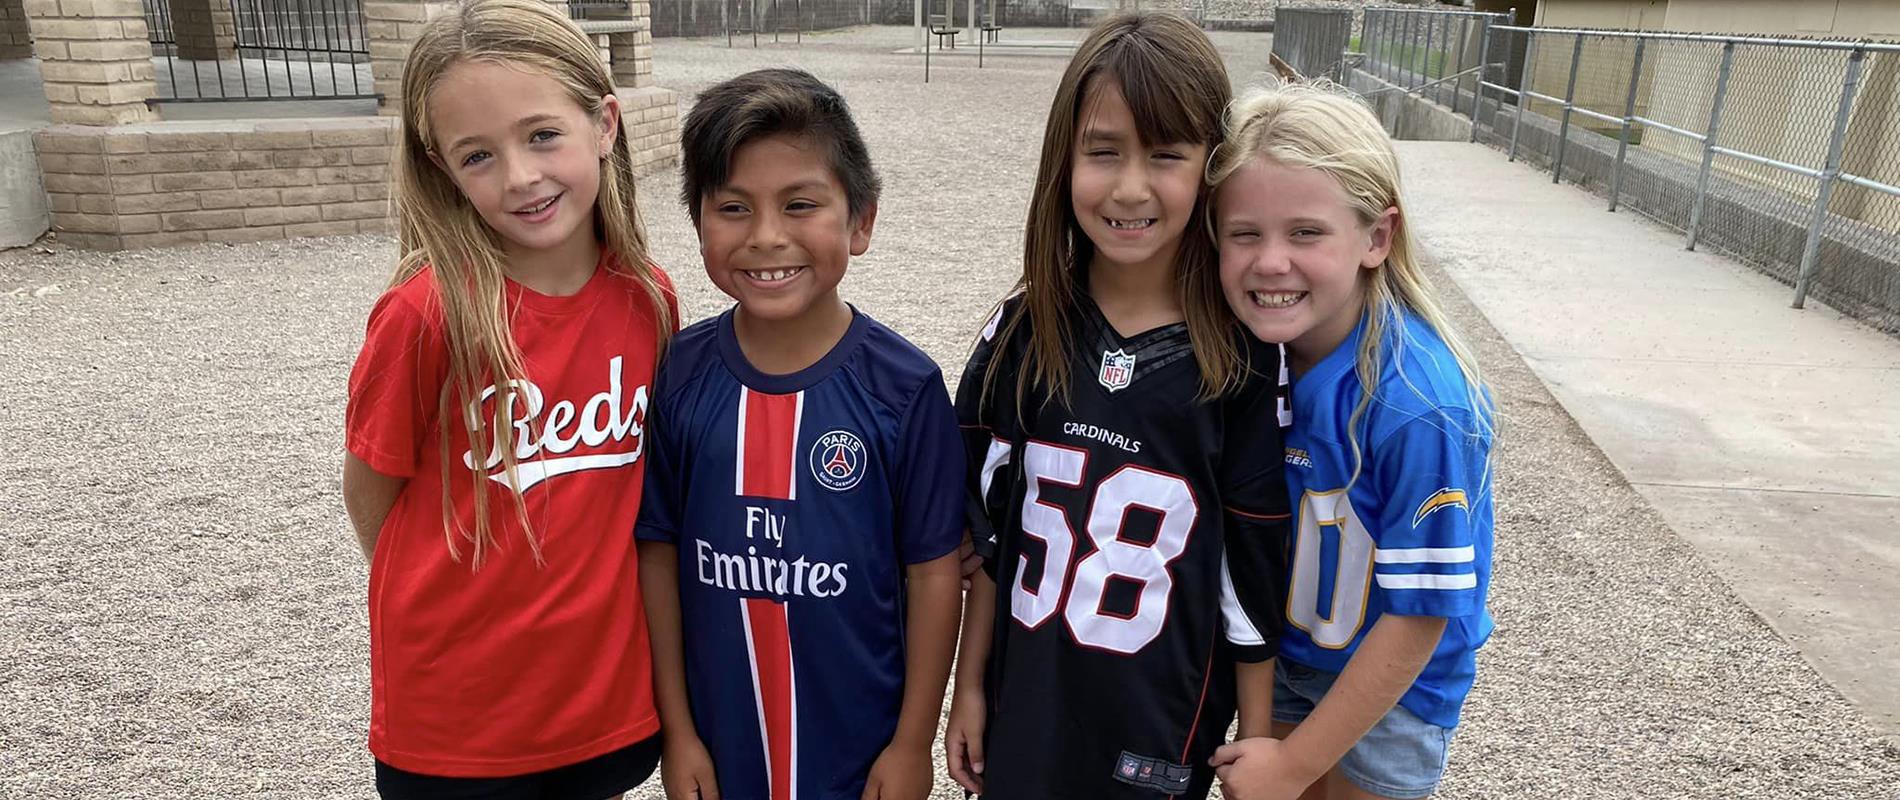 Students wearing sports jerseys for Spirit Day